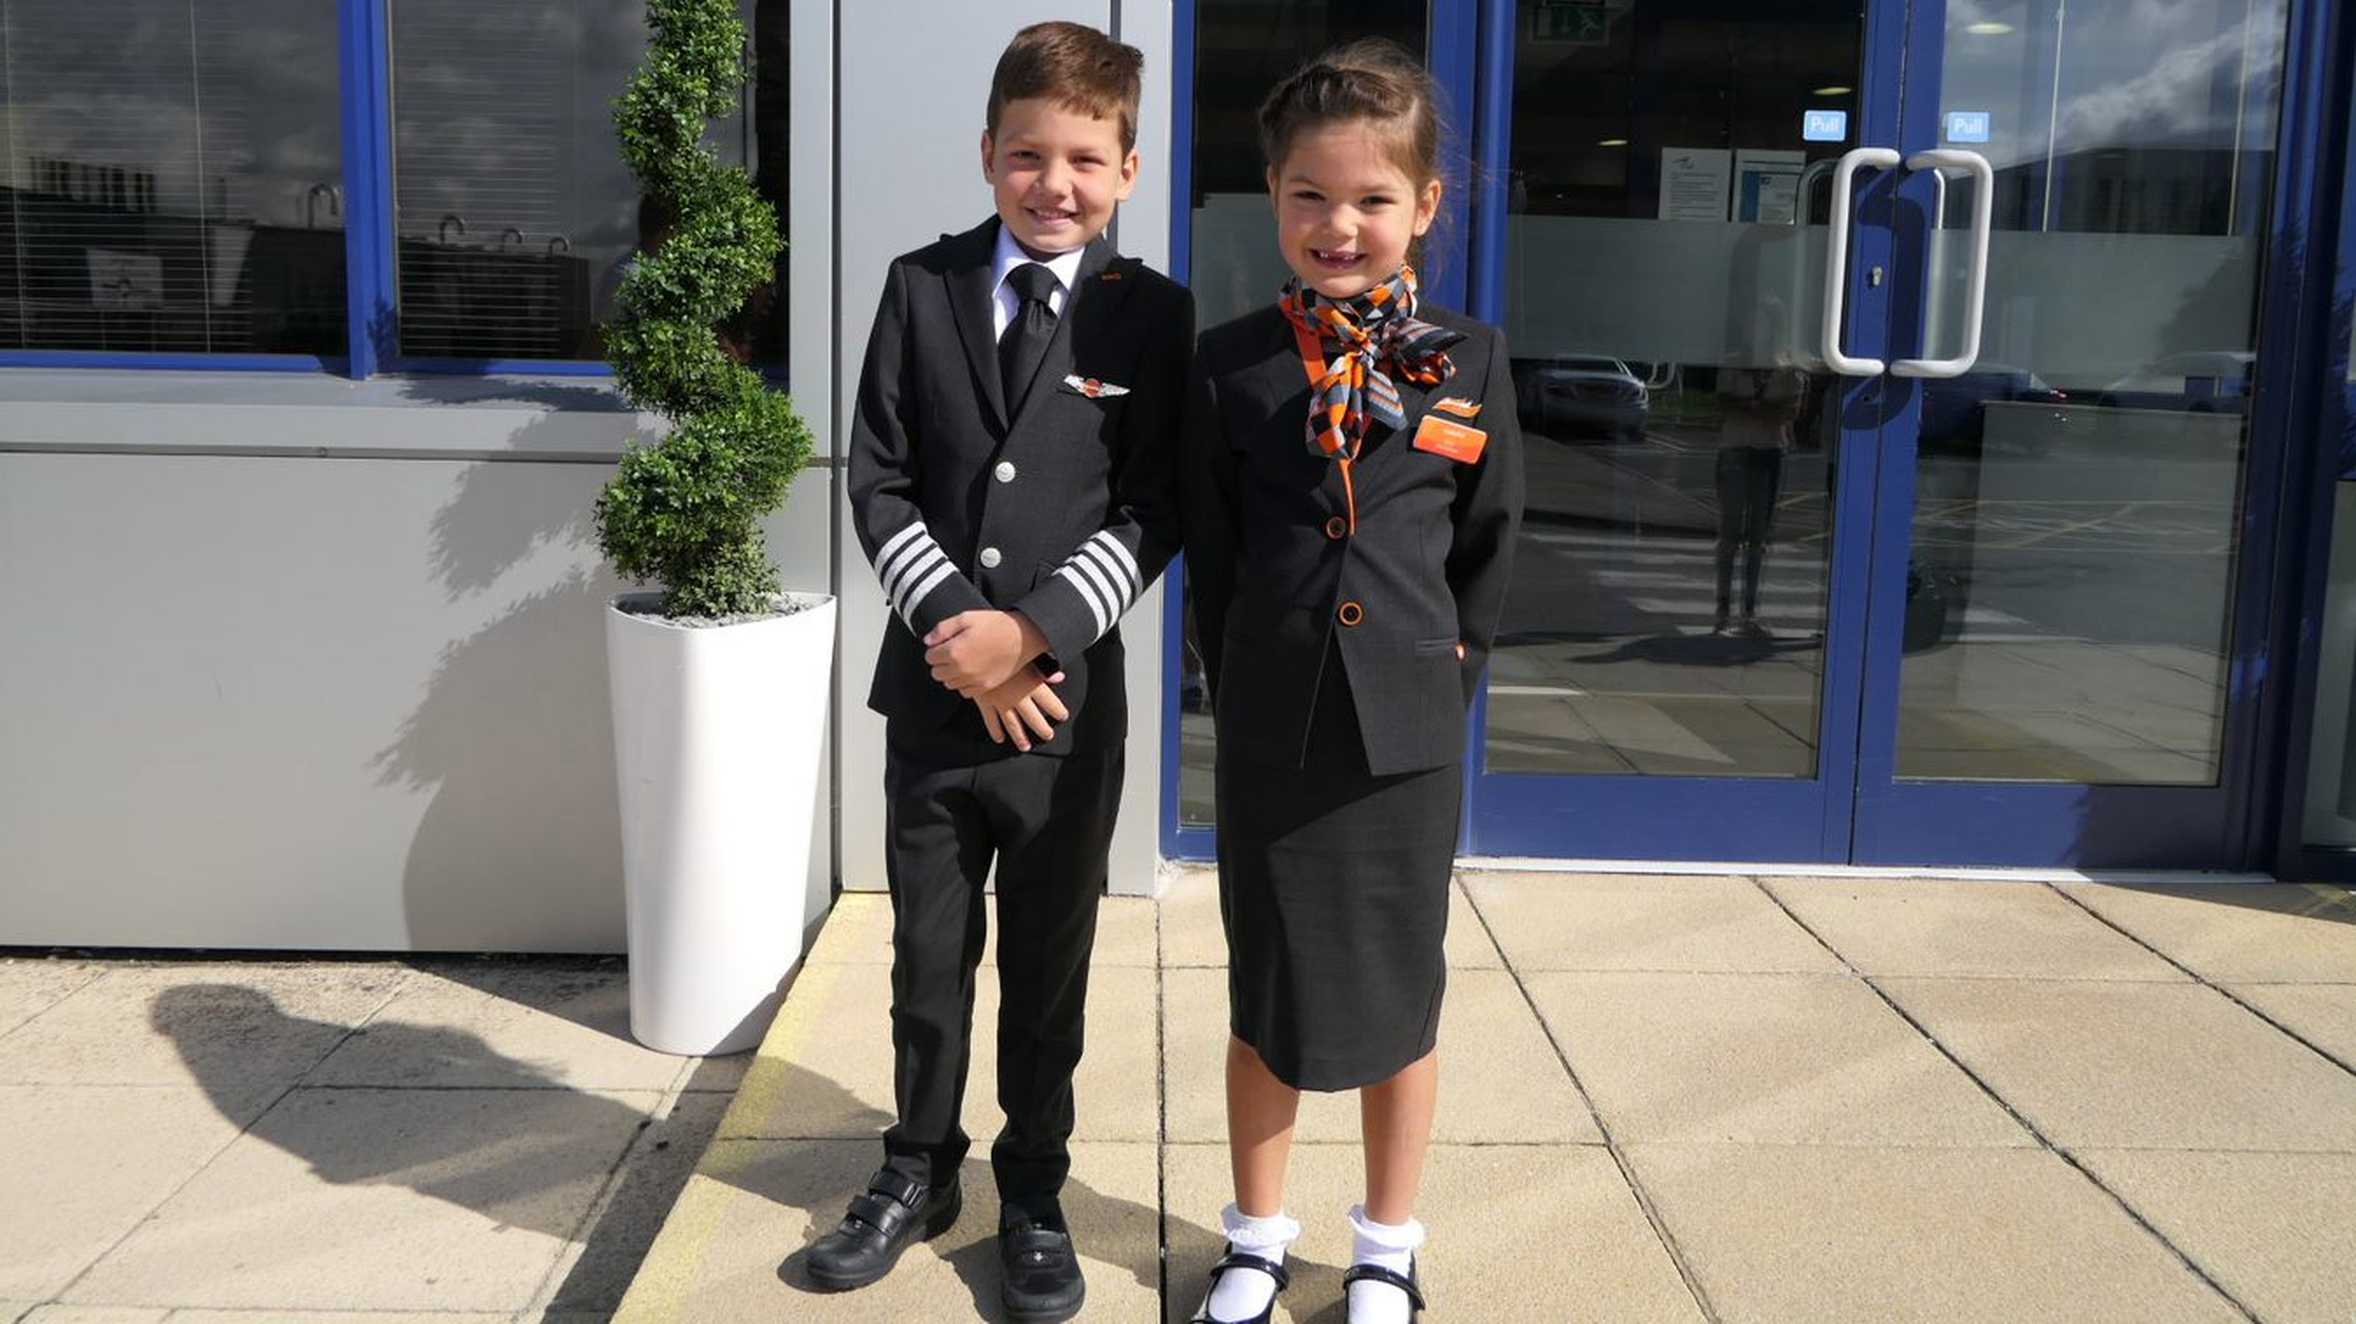 Jacob with his sister, Zoe on his wish to visit an aeroplane factory